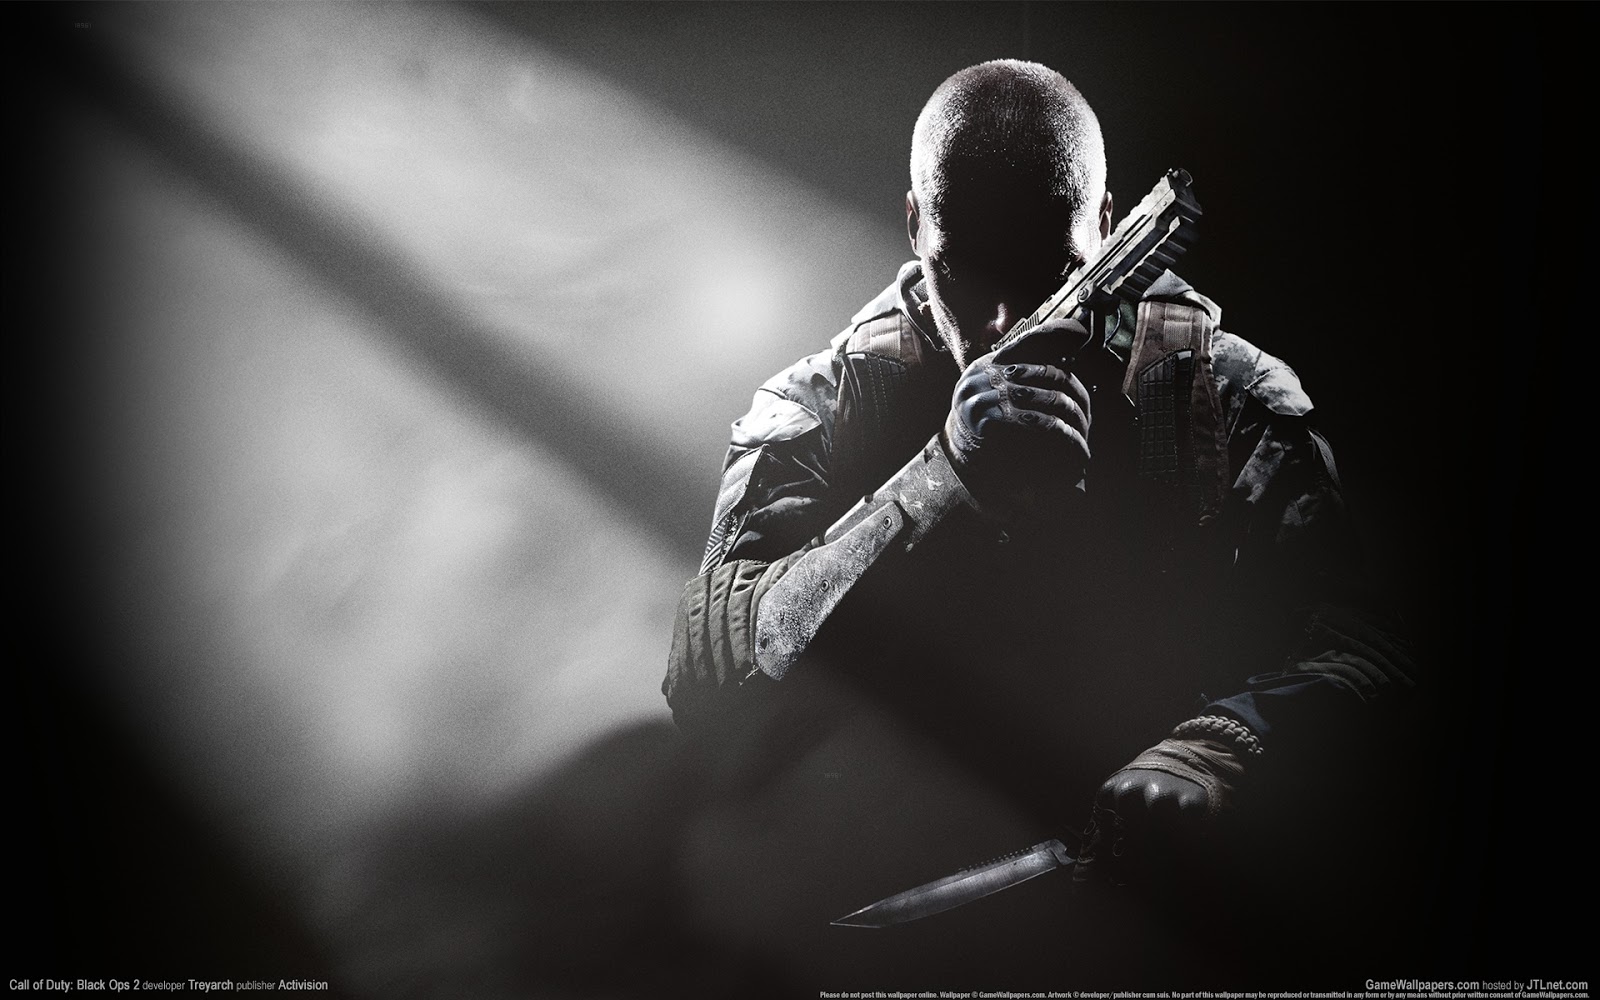 call of duty wallpaper hd,black,black and white,photography,performance,music